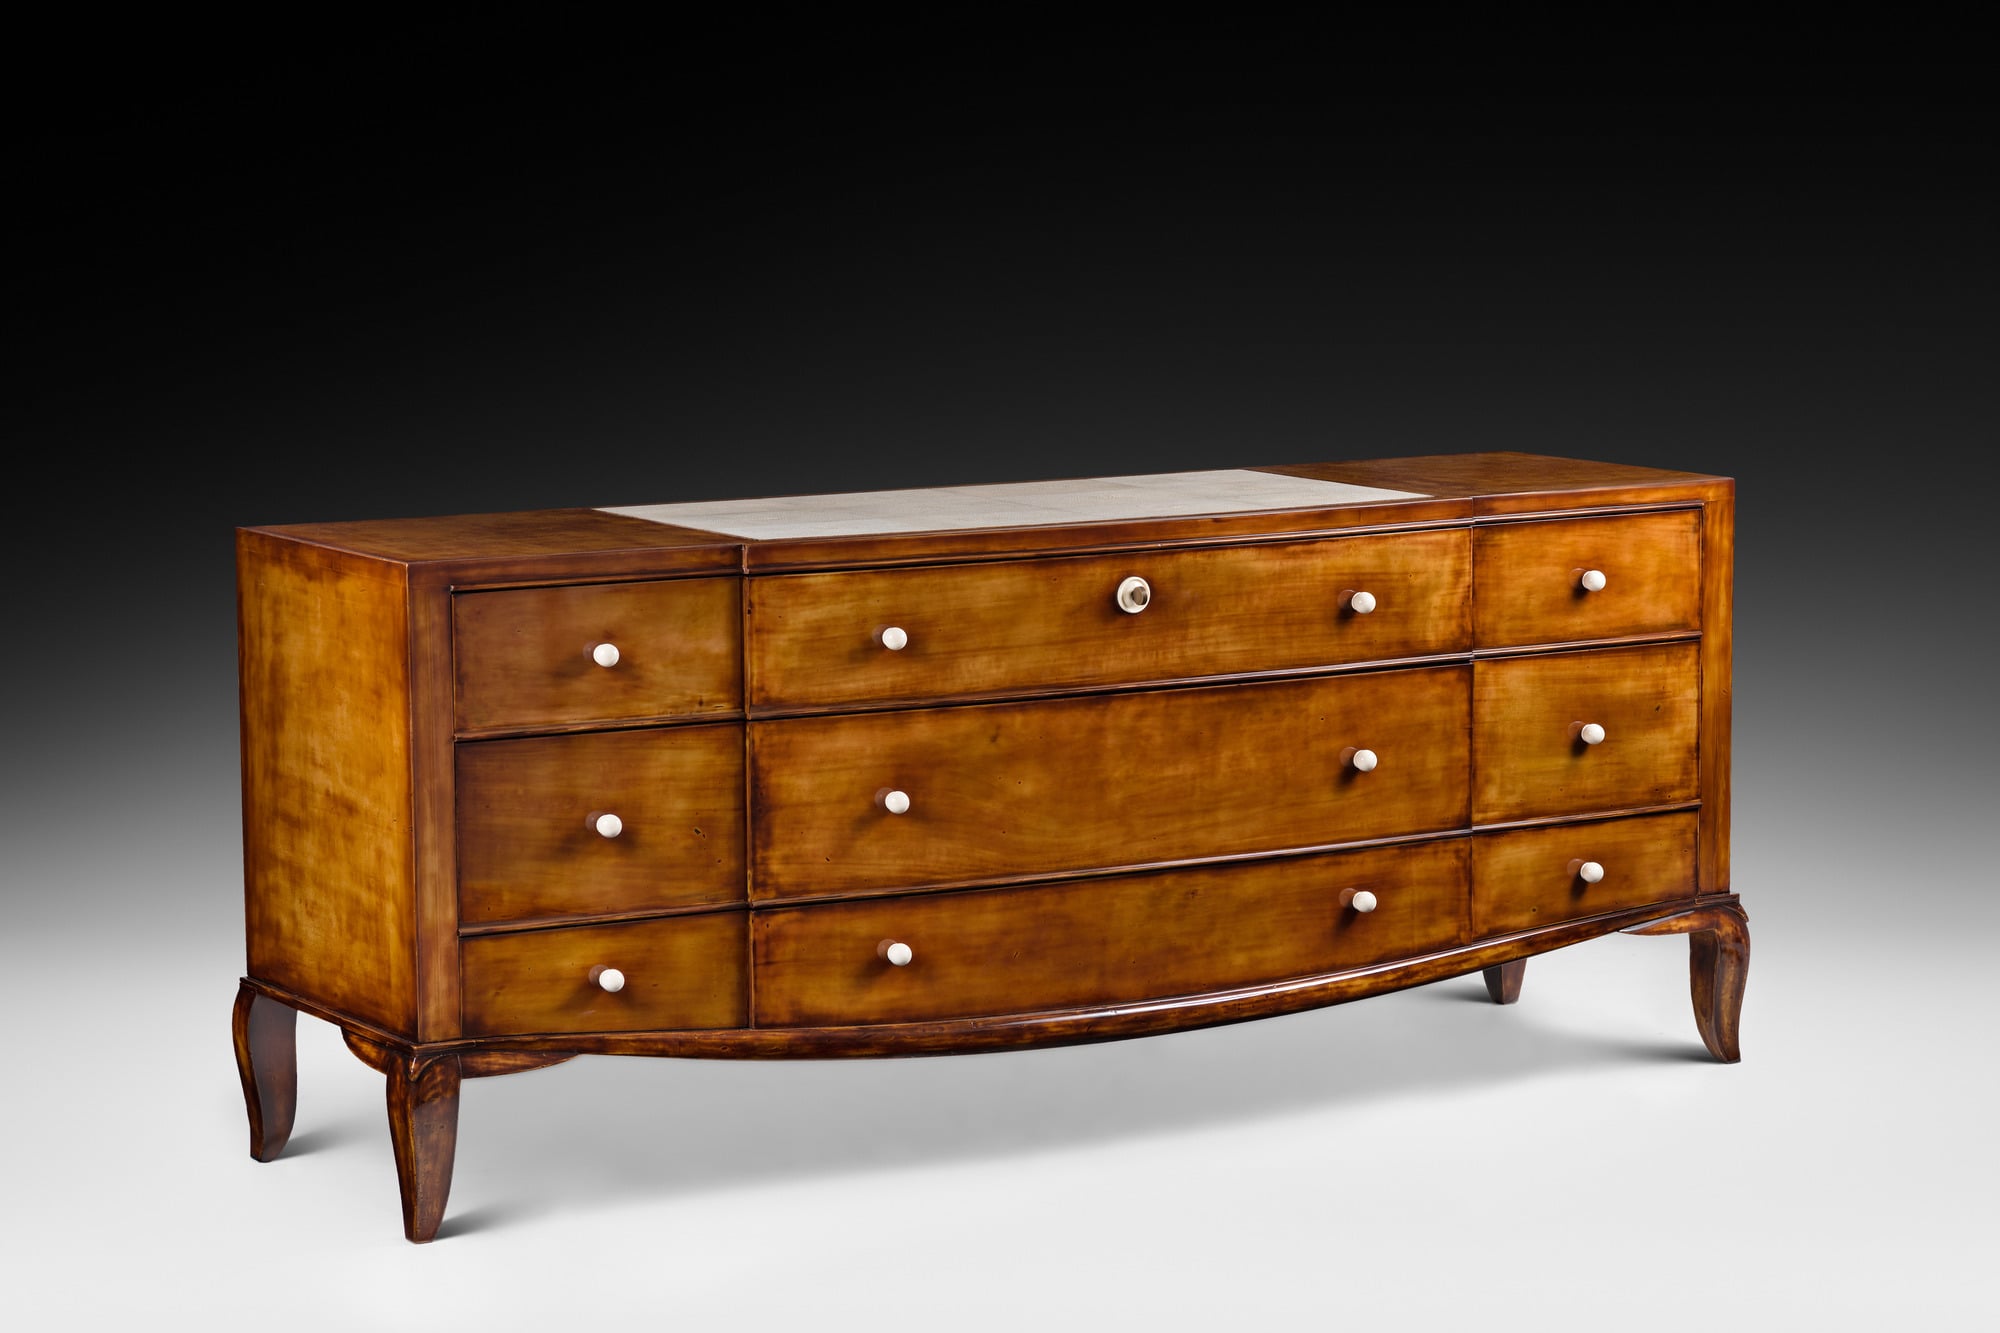 Rare ‘pantalonniere’ chest of drawers, vue 01